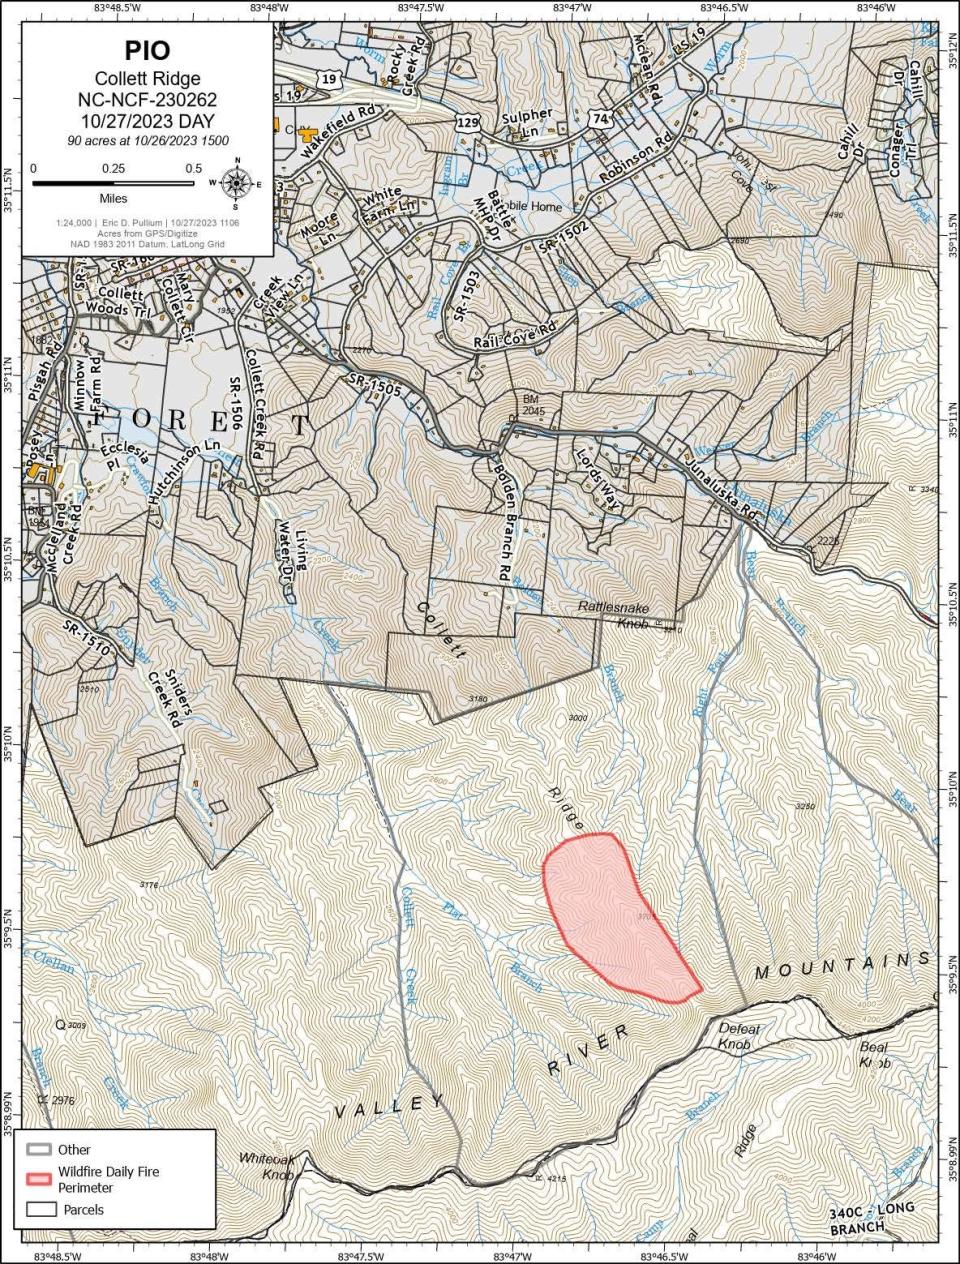 The map depicts where a 90-acre fire continues to burn in the Nantahala National Forest Oct. 27.